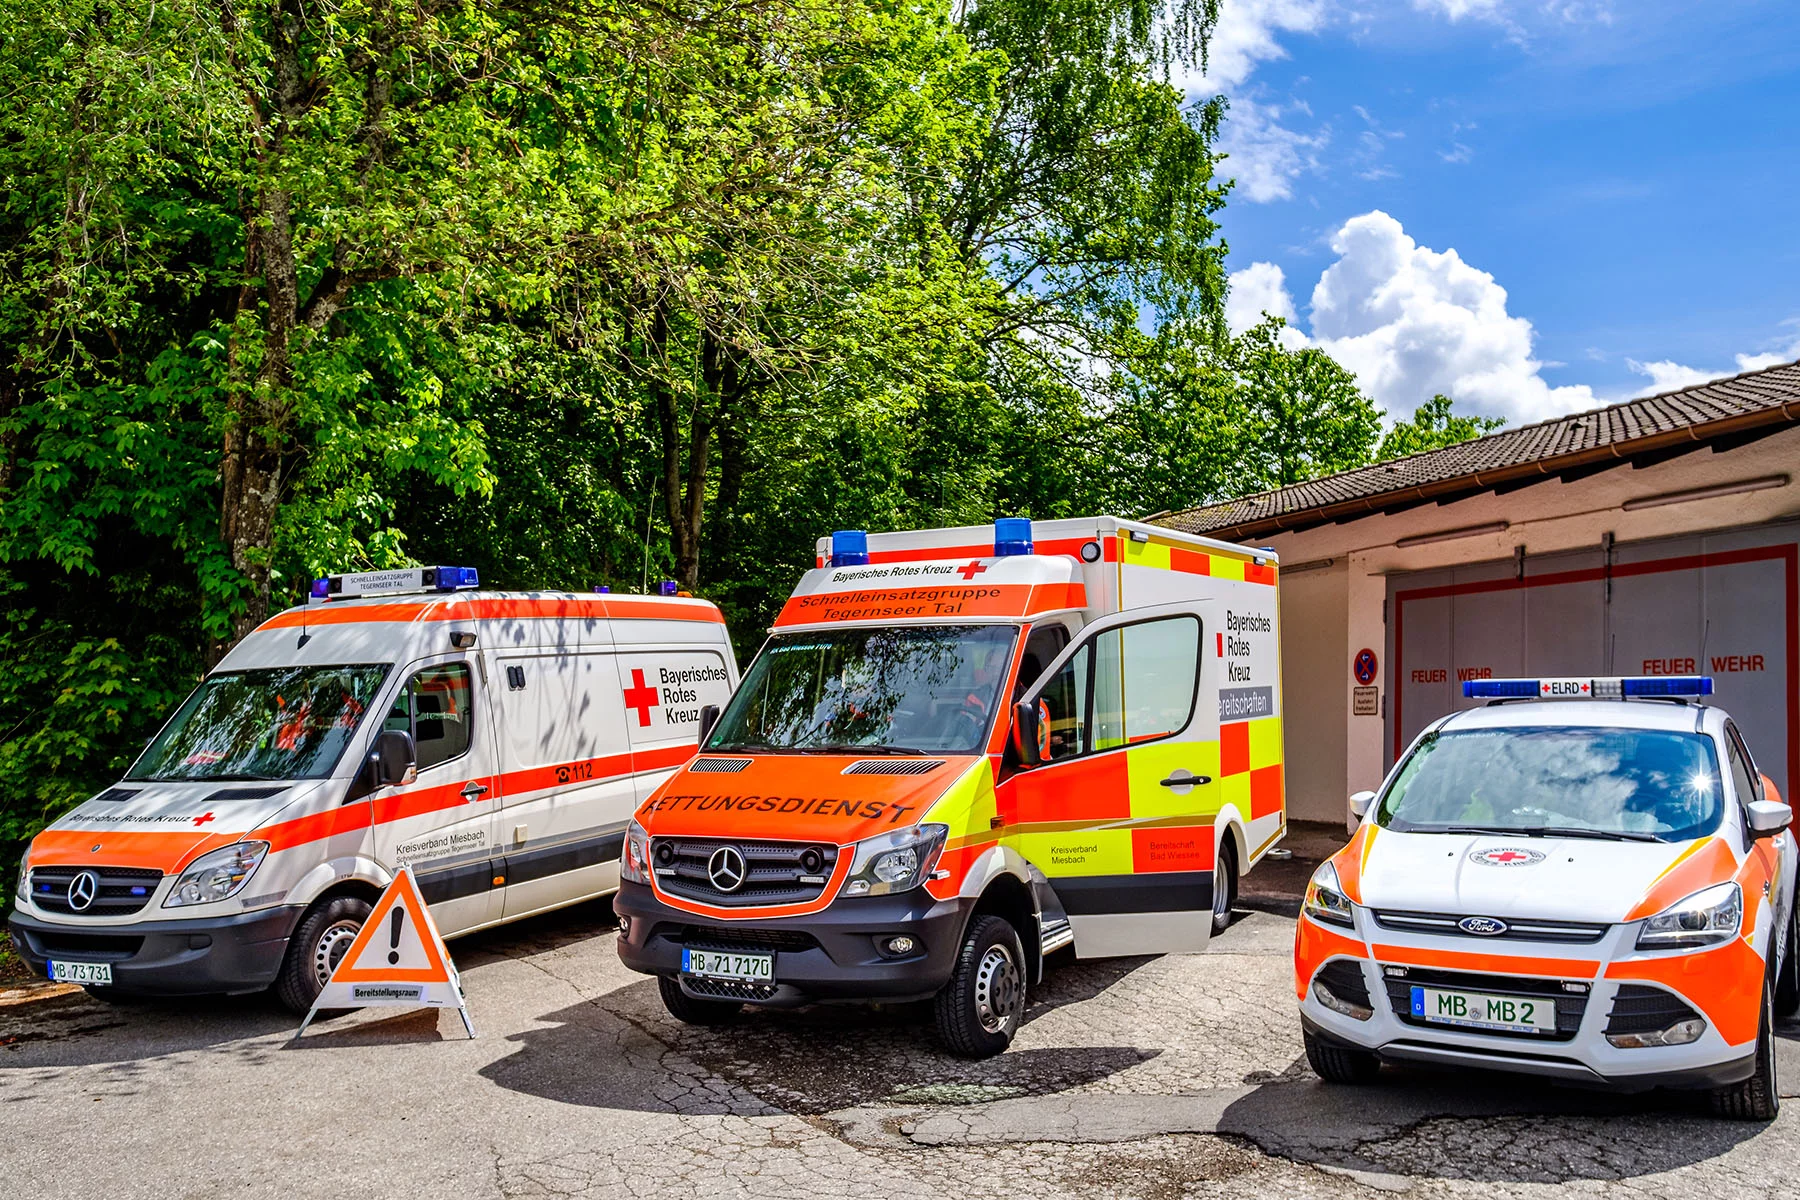 Three different types of German emergency vehicles are parked outside on a sunny day